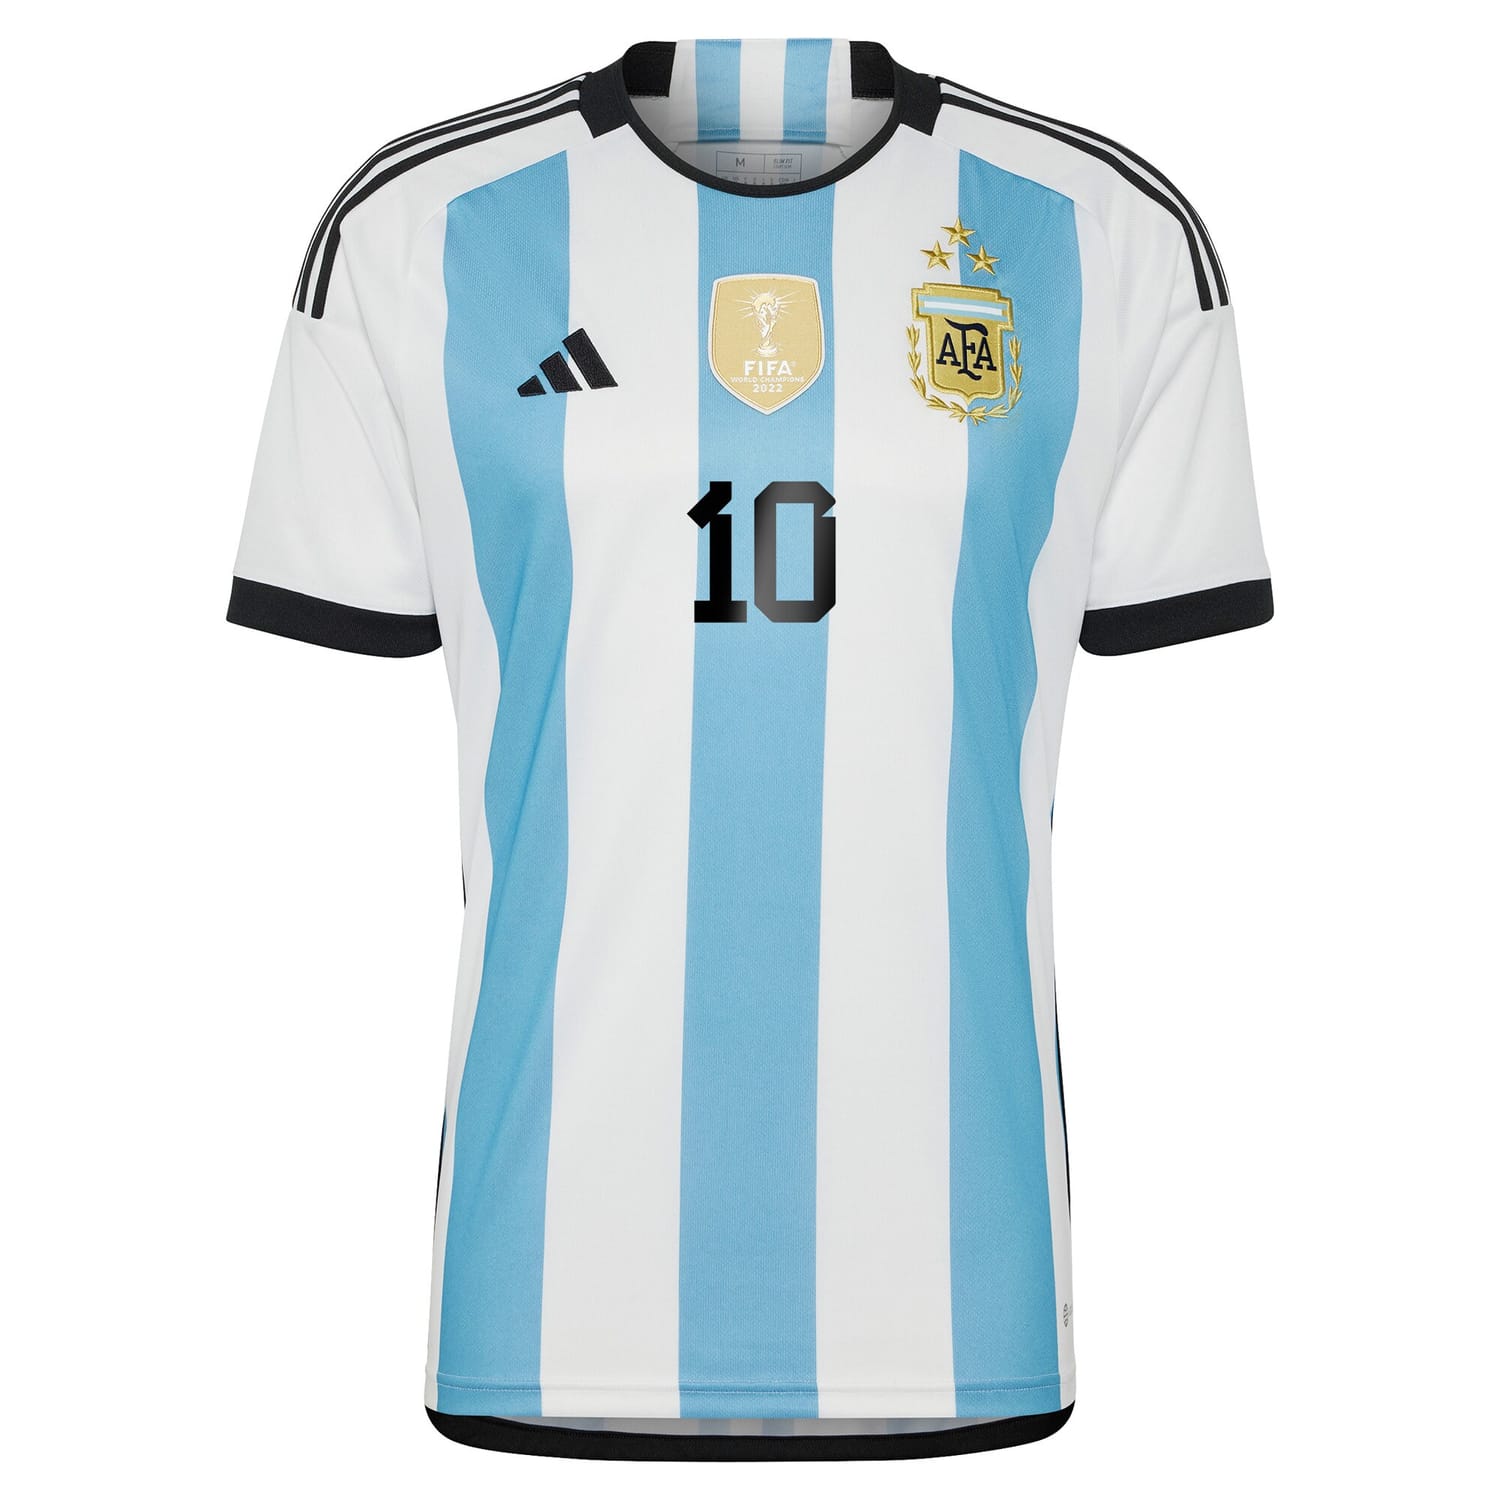 Champions Argentina National Team Home Winners Jersey Shirt White/Light Blue 2022 player Lionel Messi printing for Men